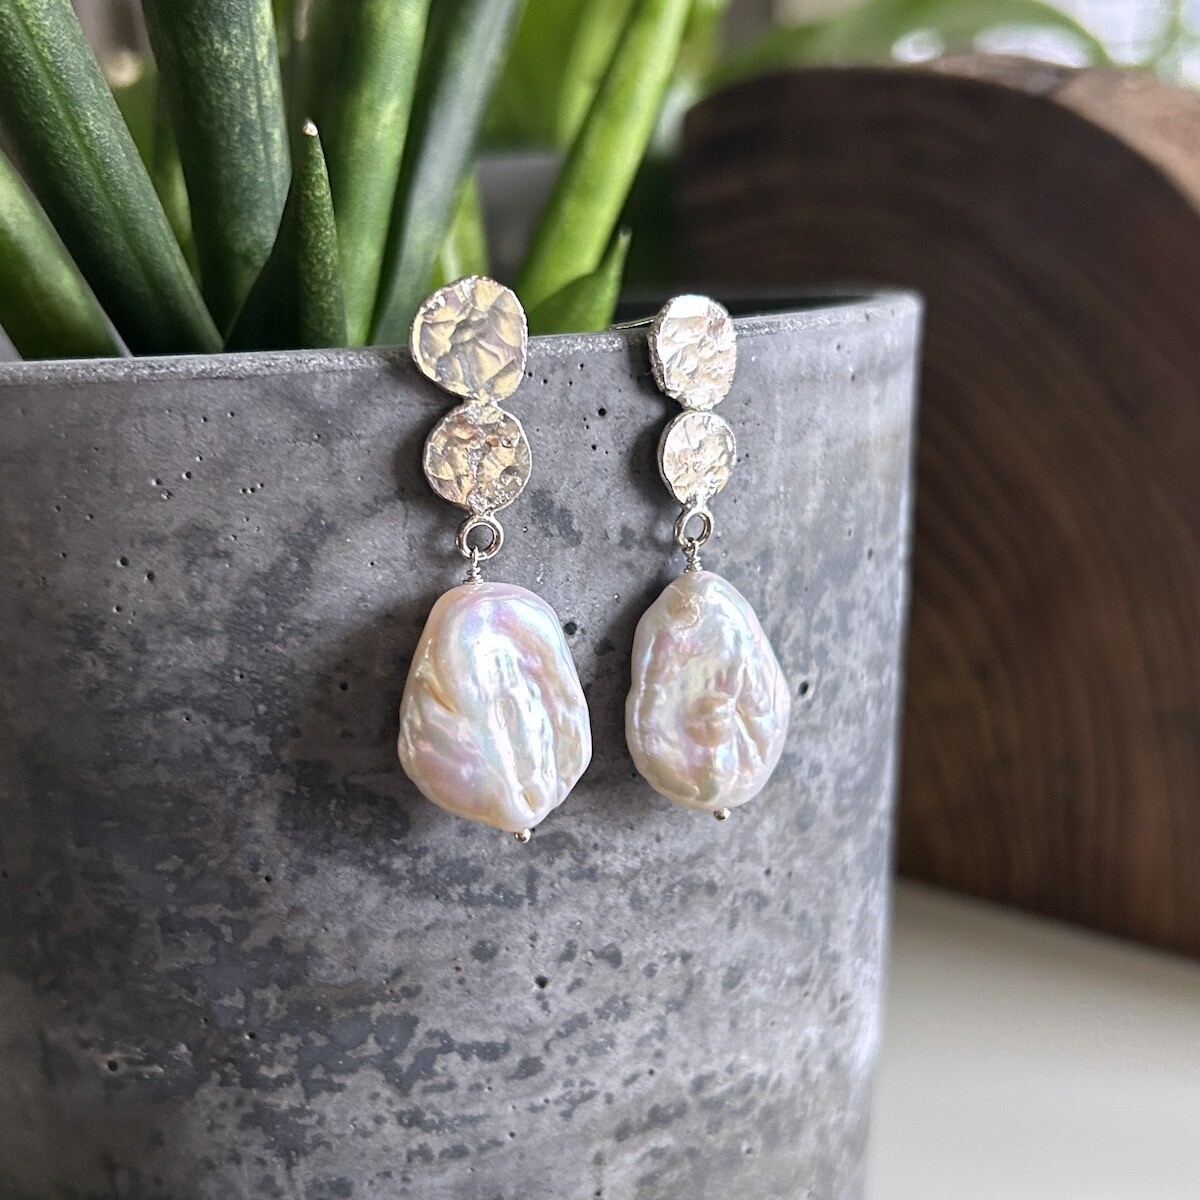 Handmade Silver Earrings with 2 recycled pebbles, white baroque pearl